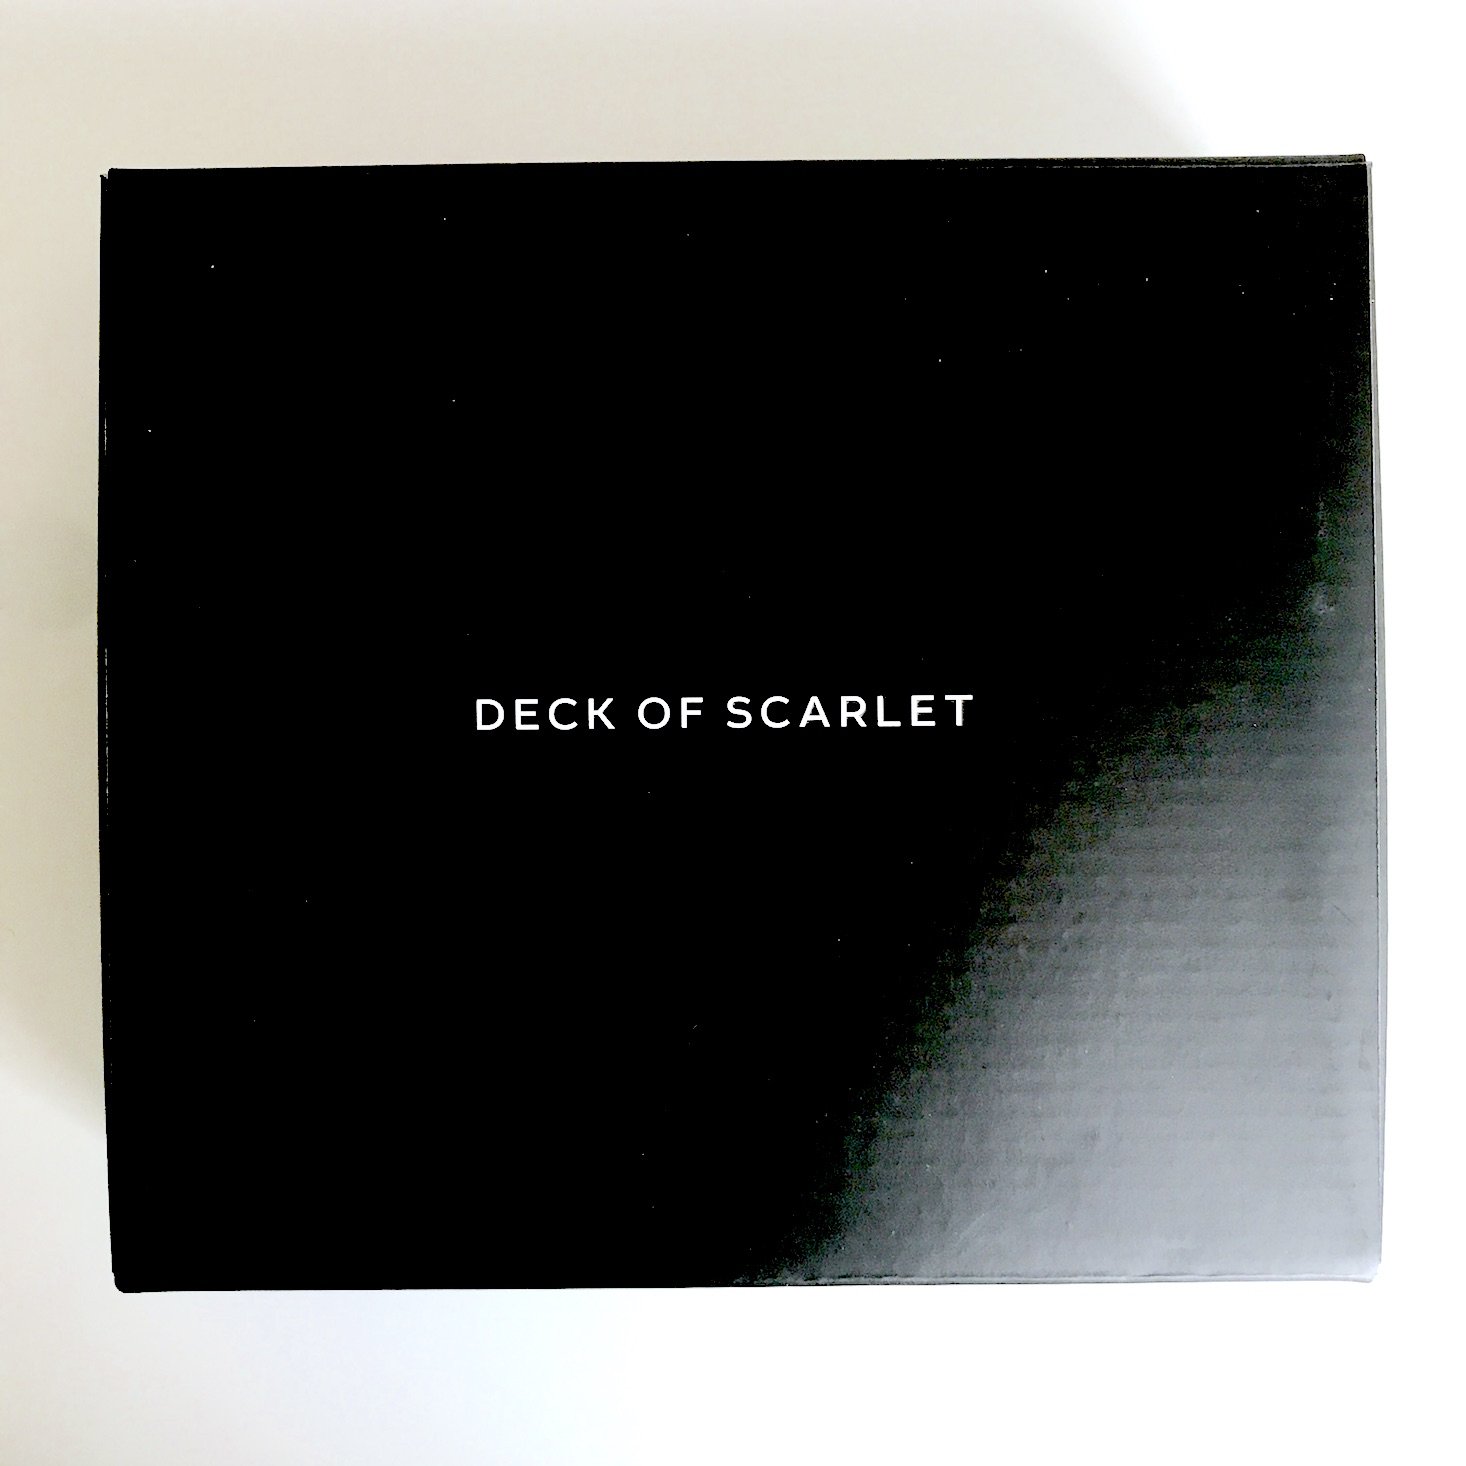 Deck of Scarlet January 2018 - closed box